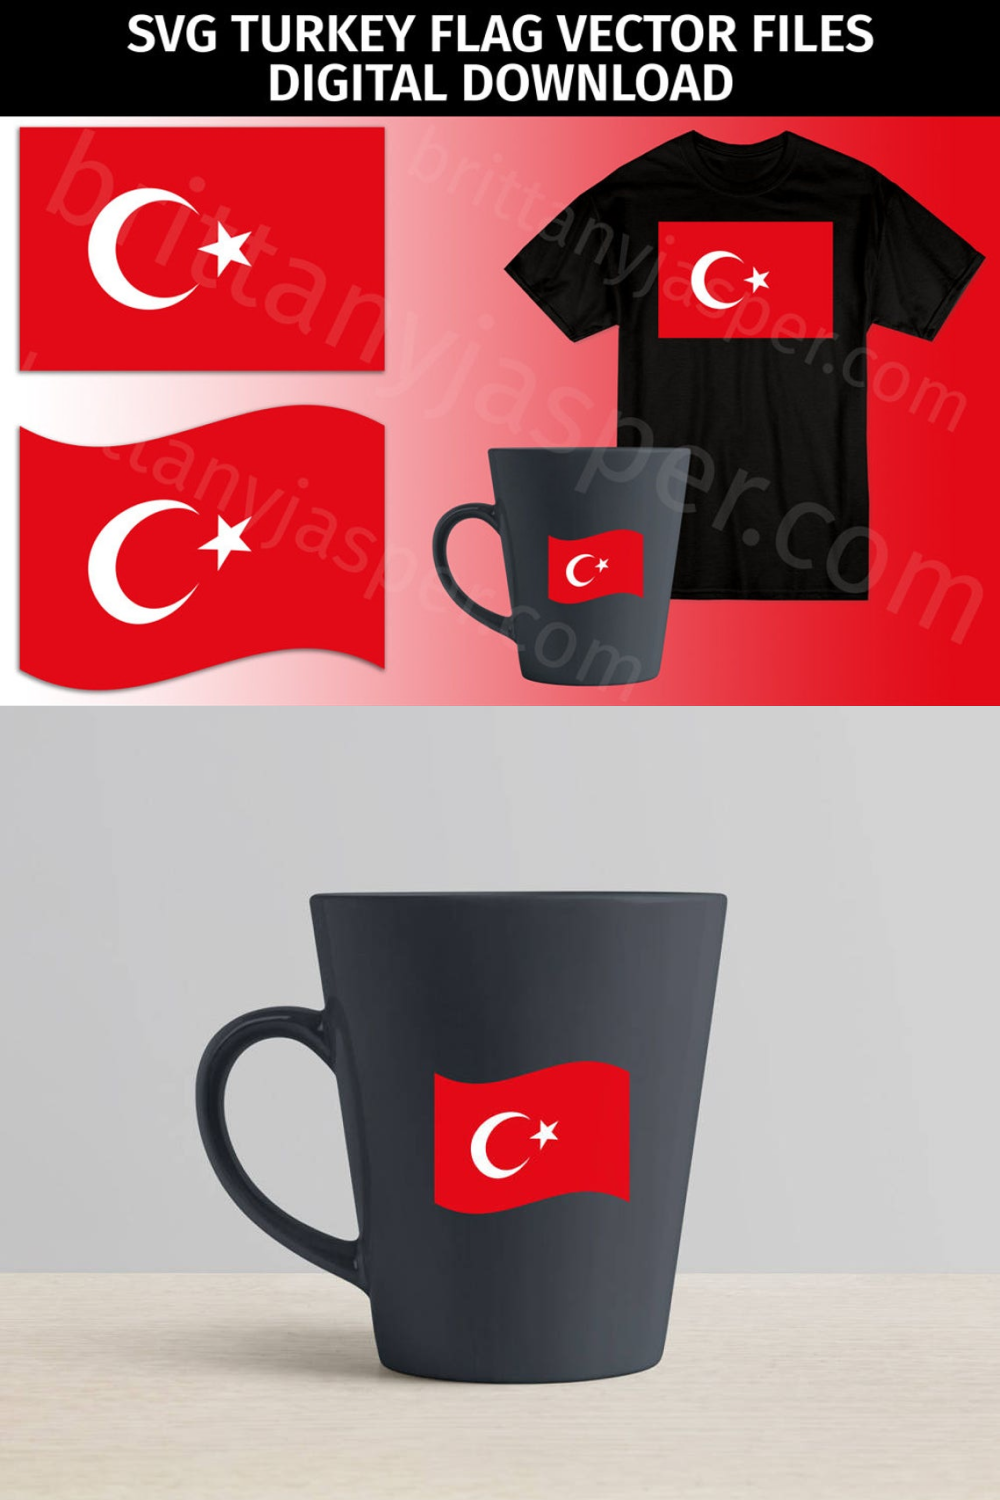 Turkish flags for patriots.